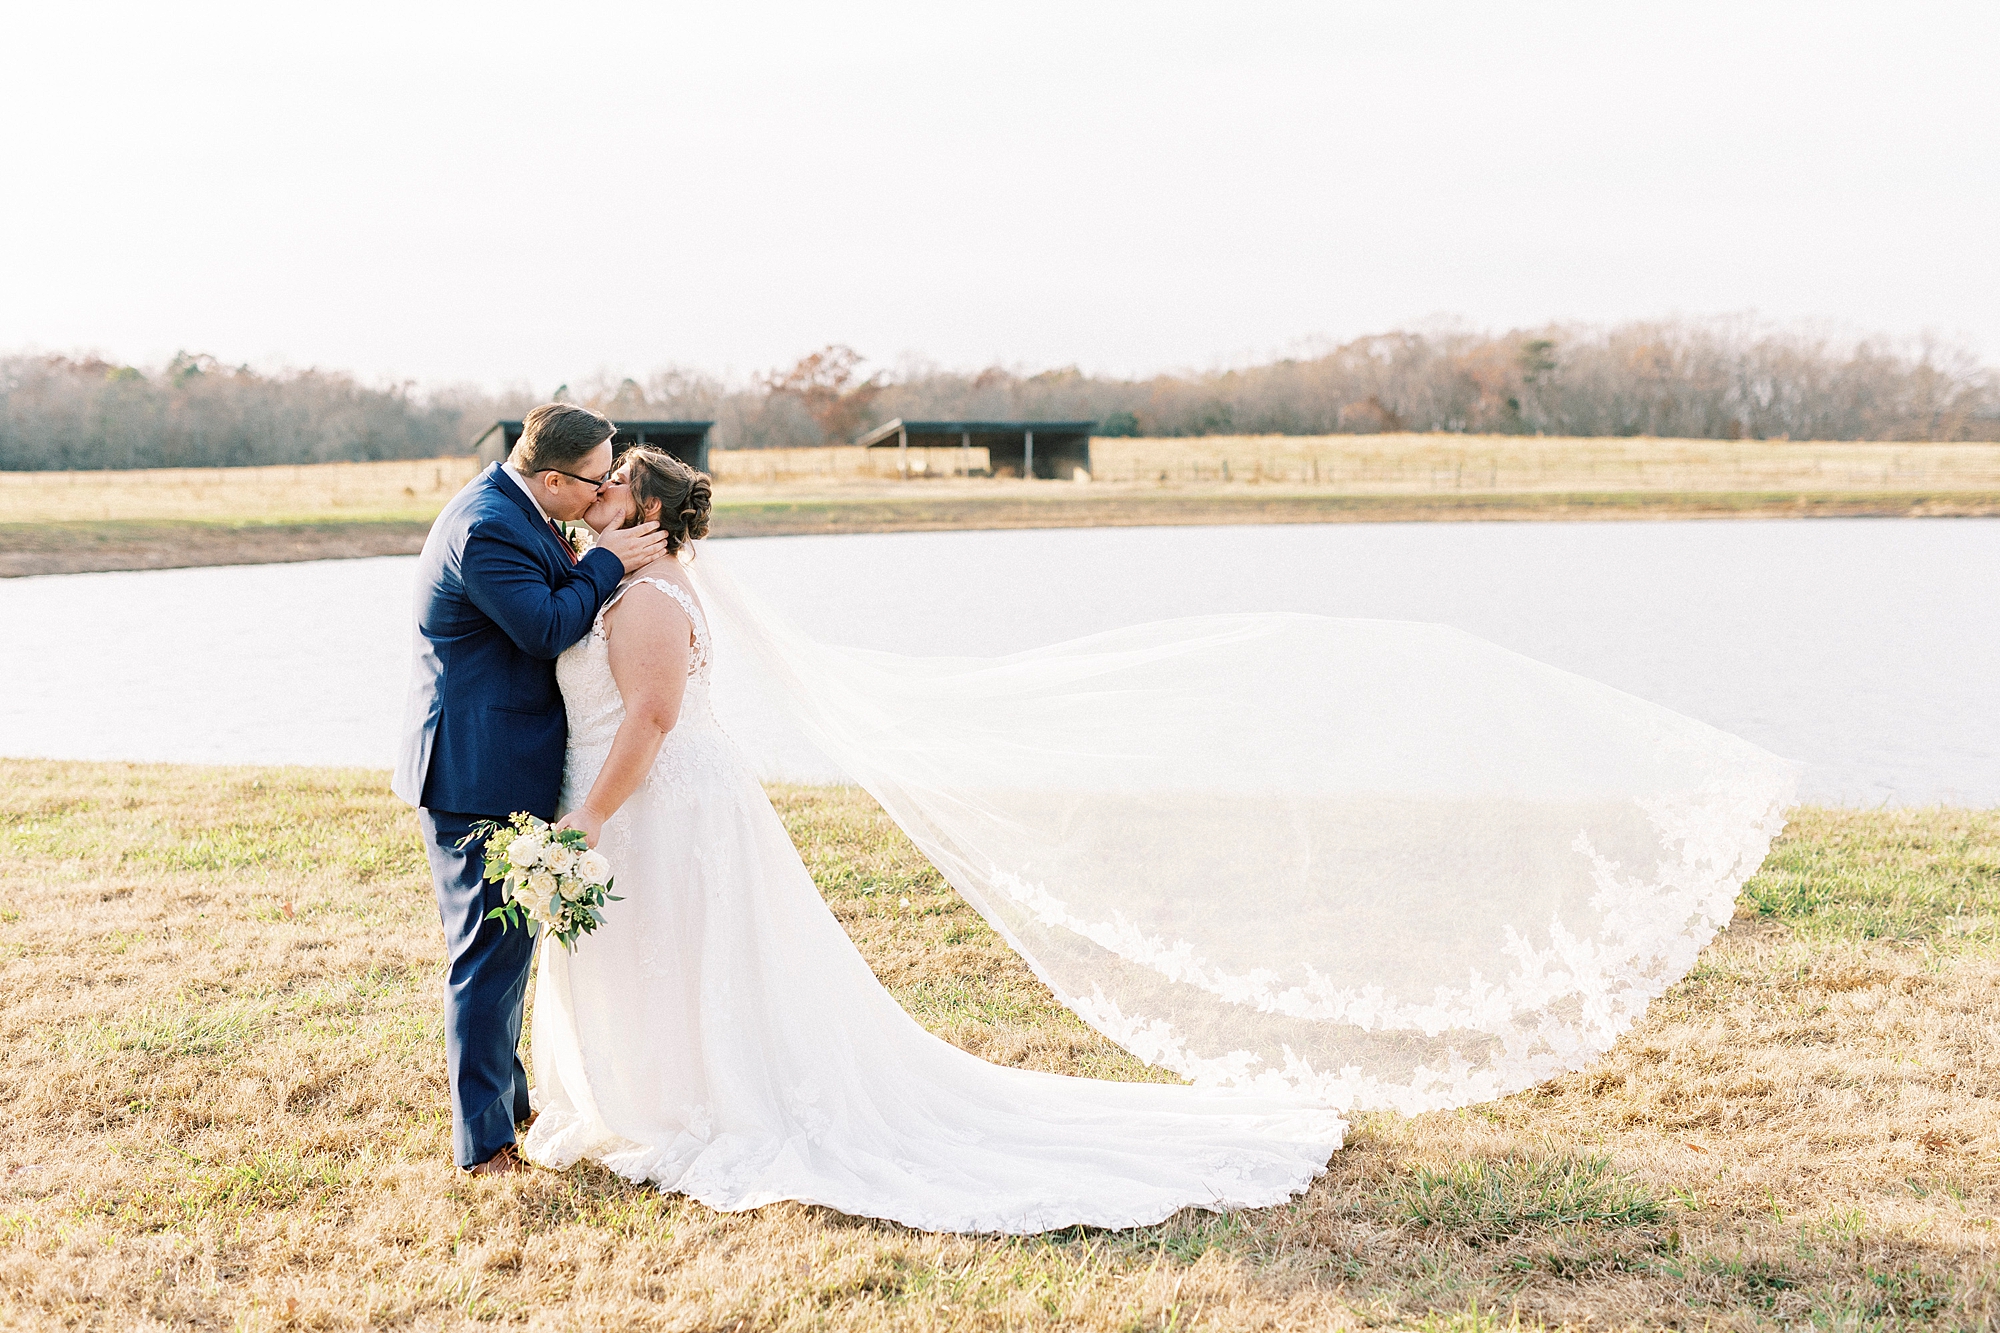 newlyweds kiss with bride's veil floating behind them in front of pond and cows